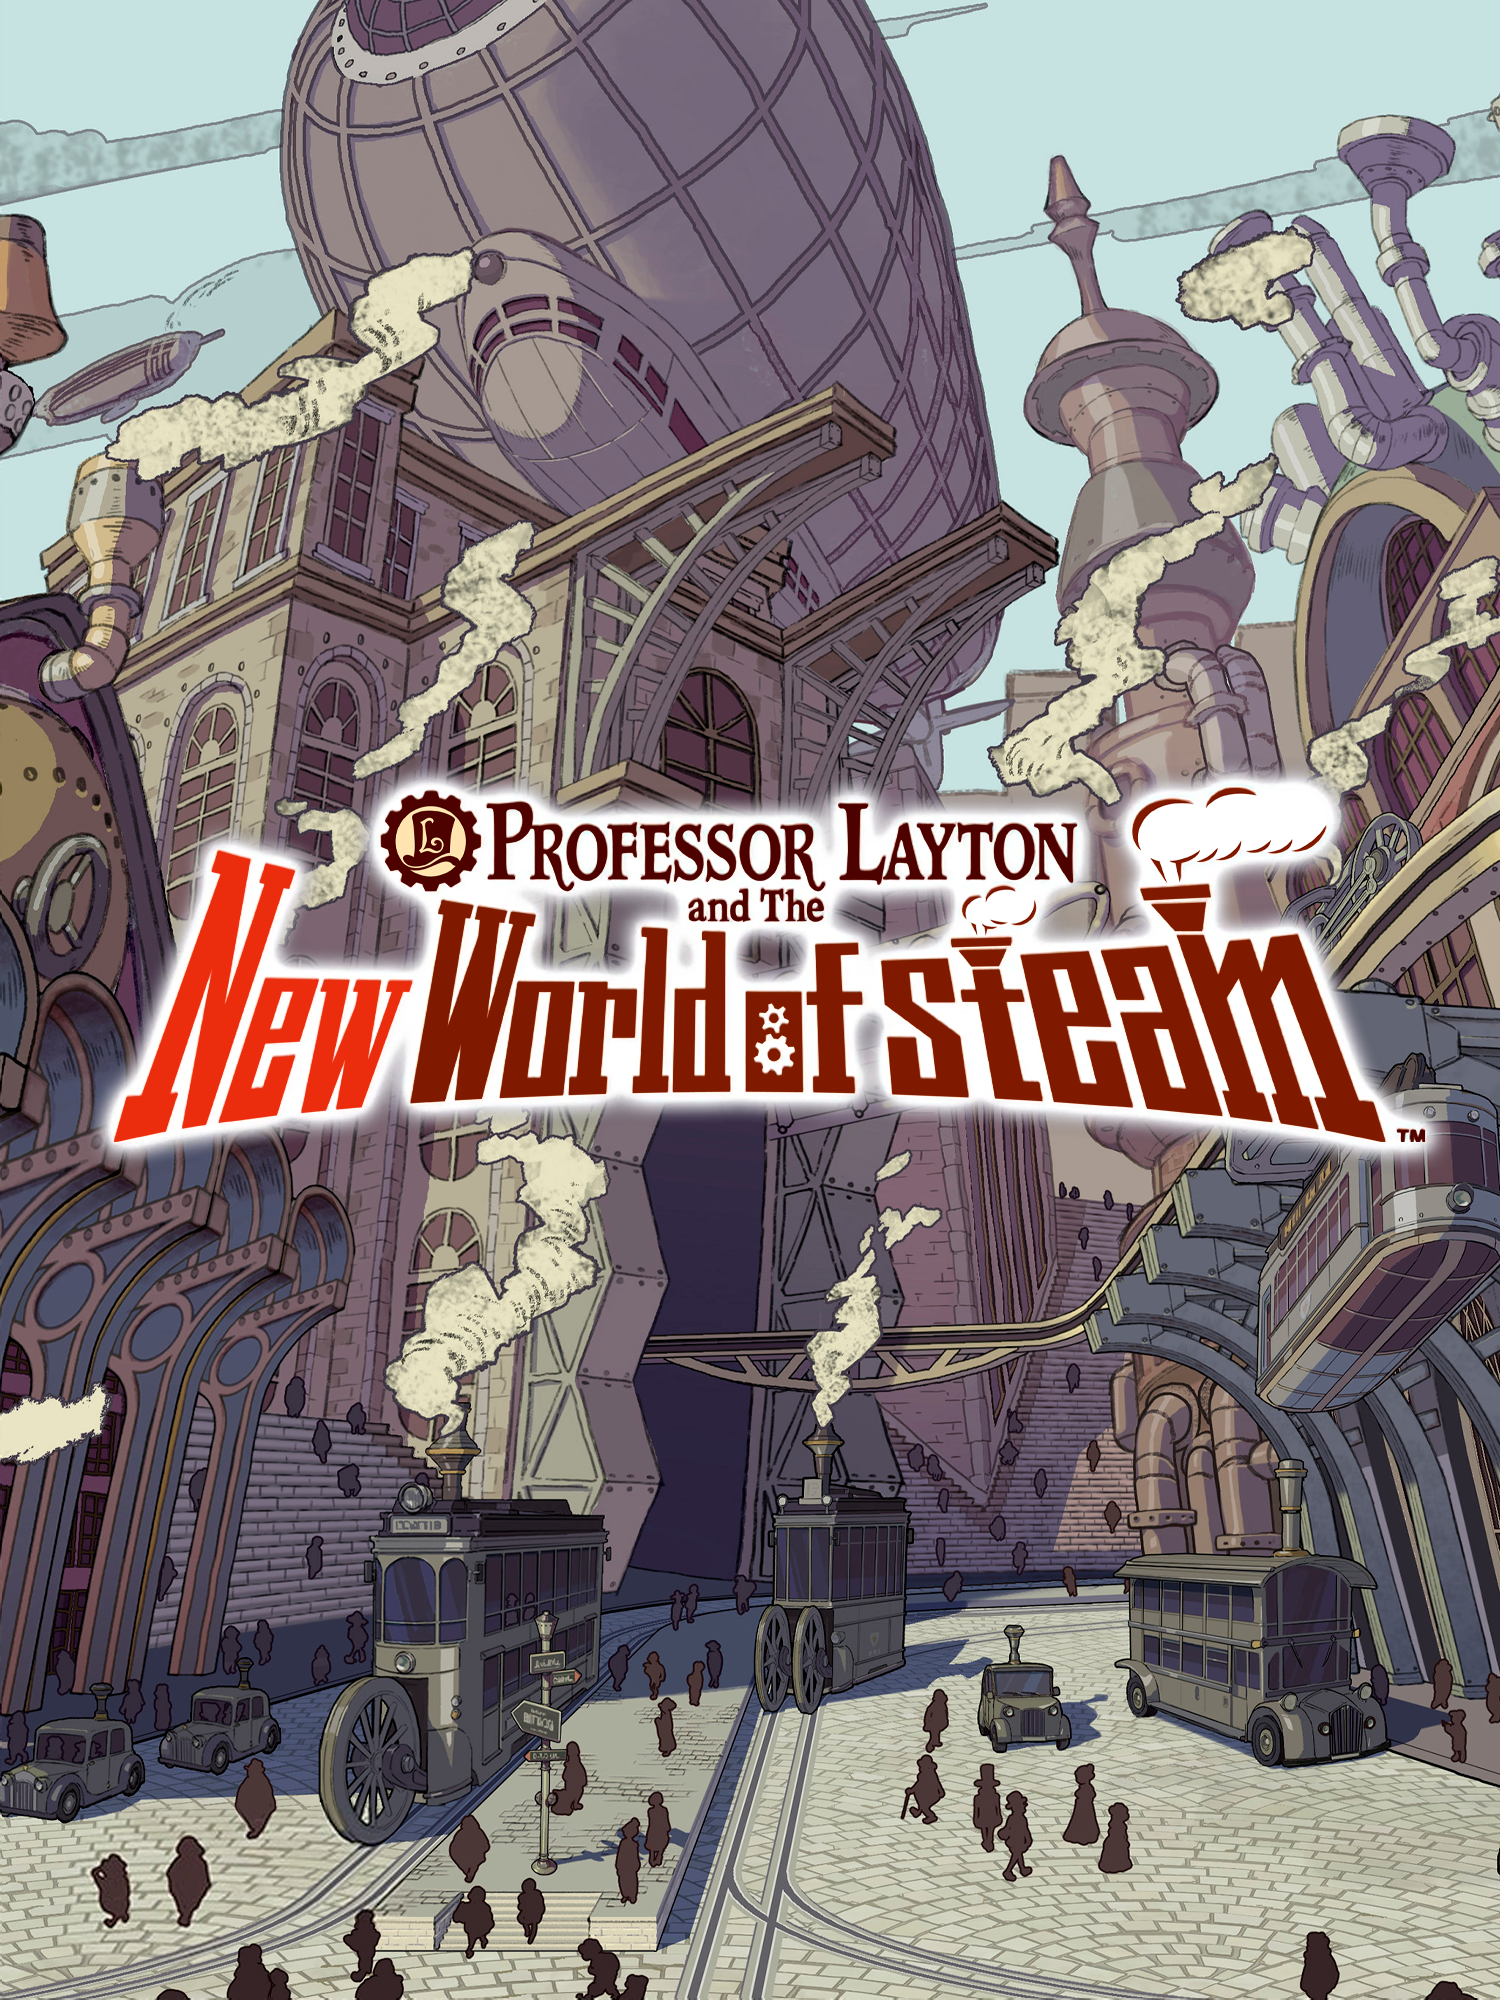 Professor Layton and the New World of Steam - Teaser Trailer